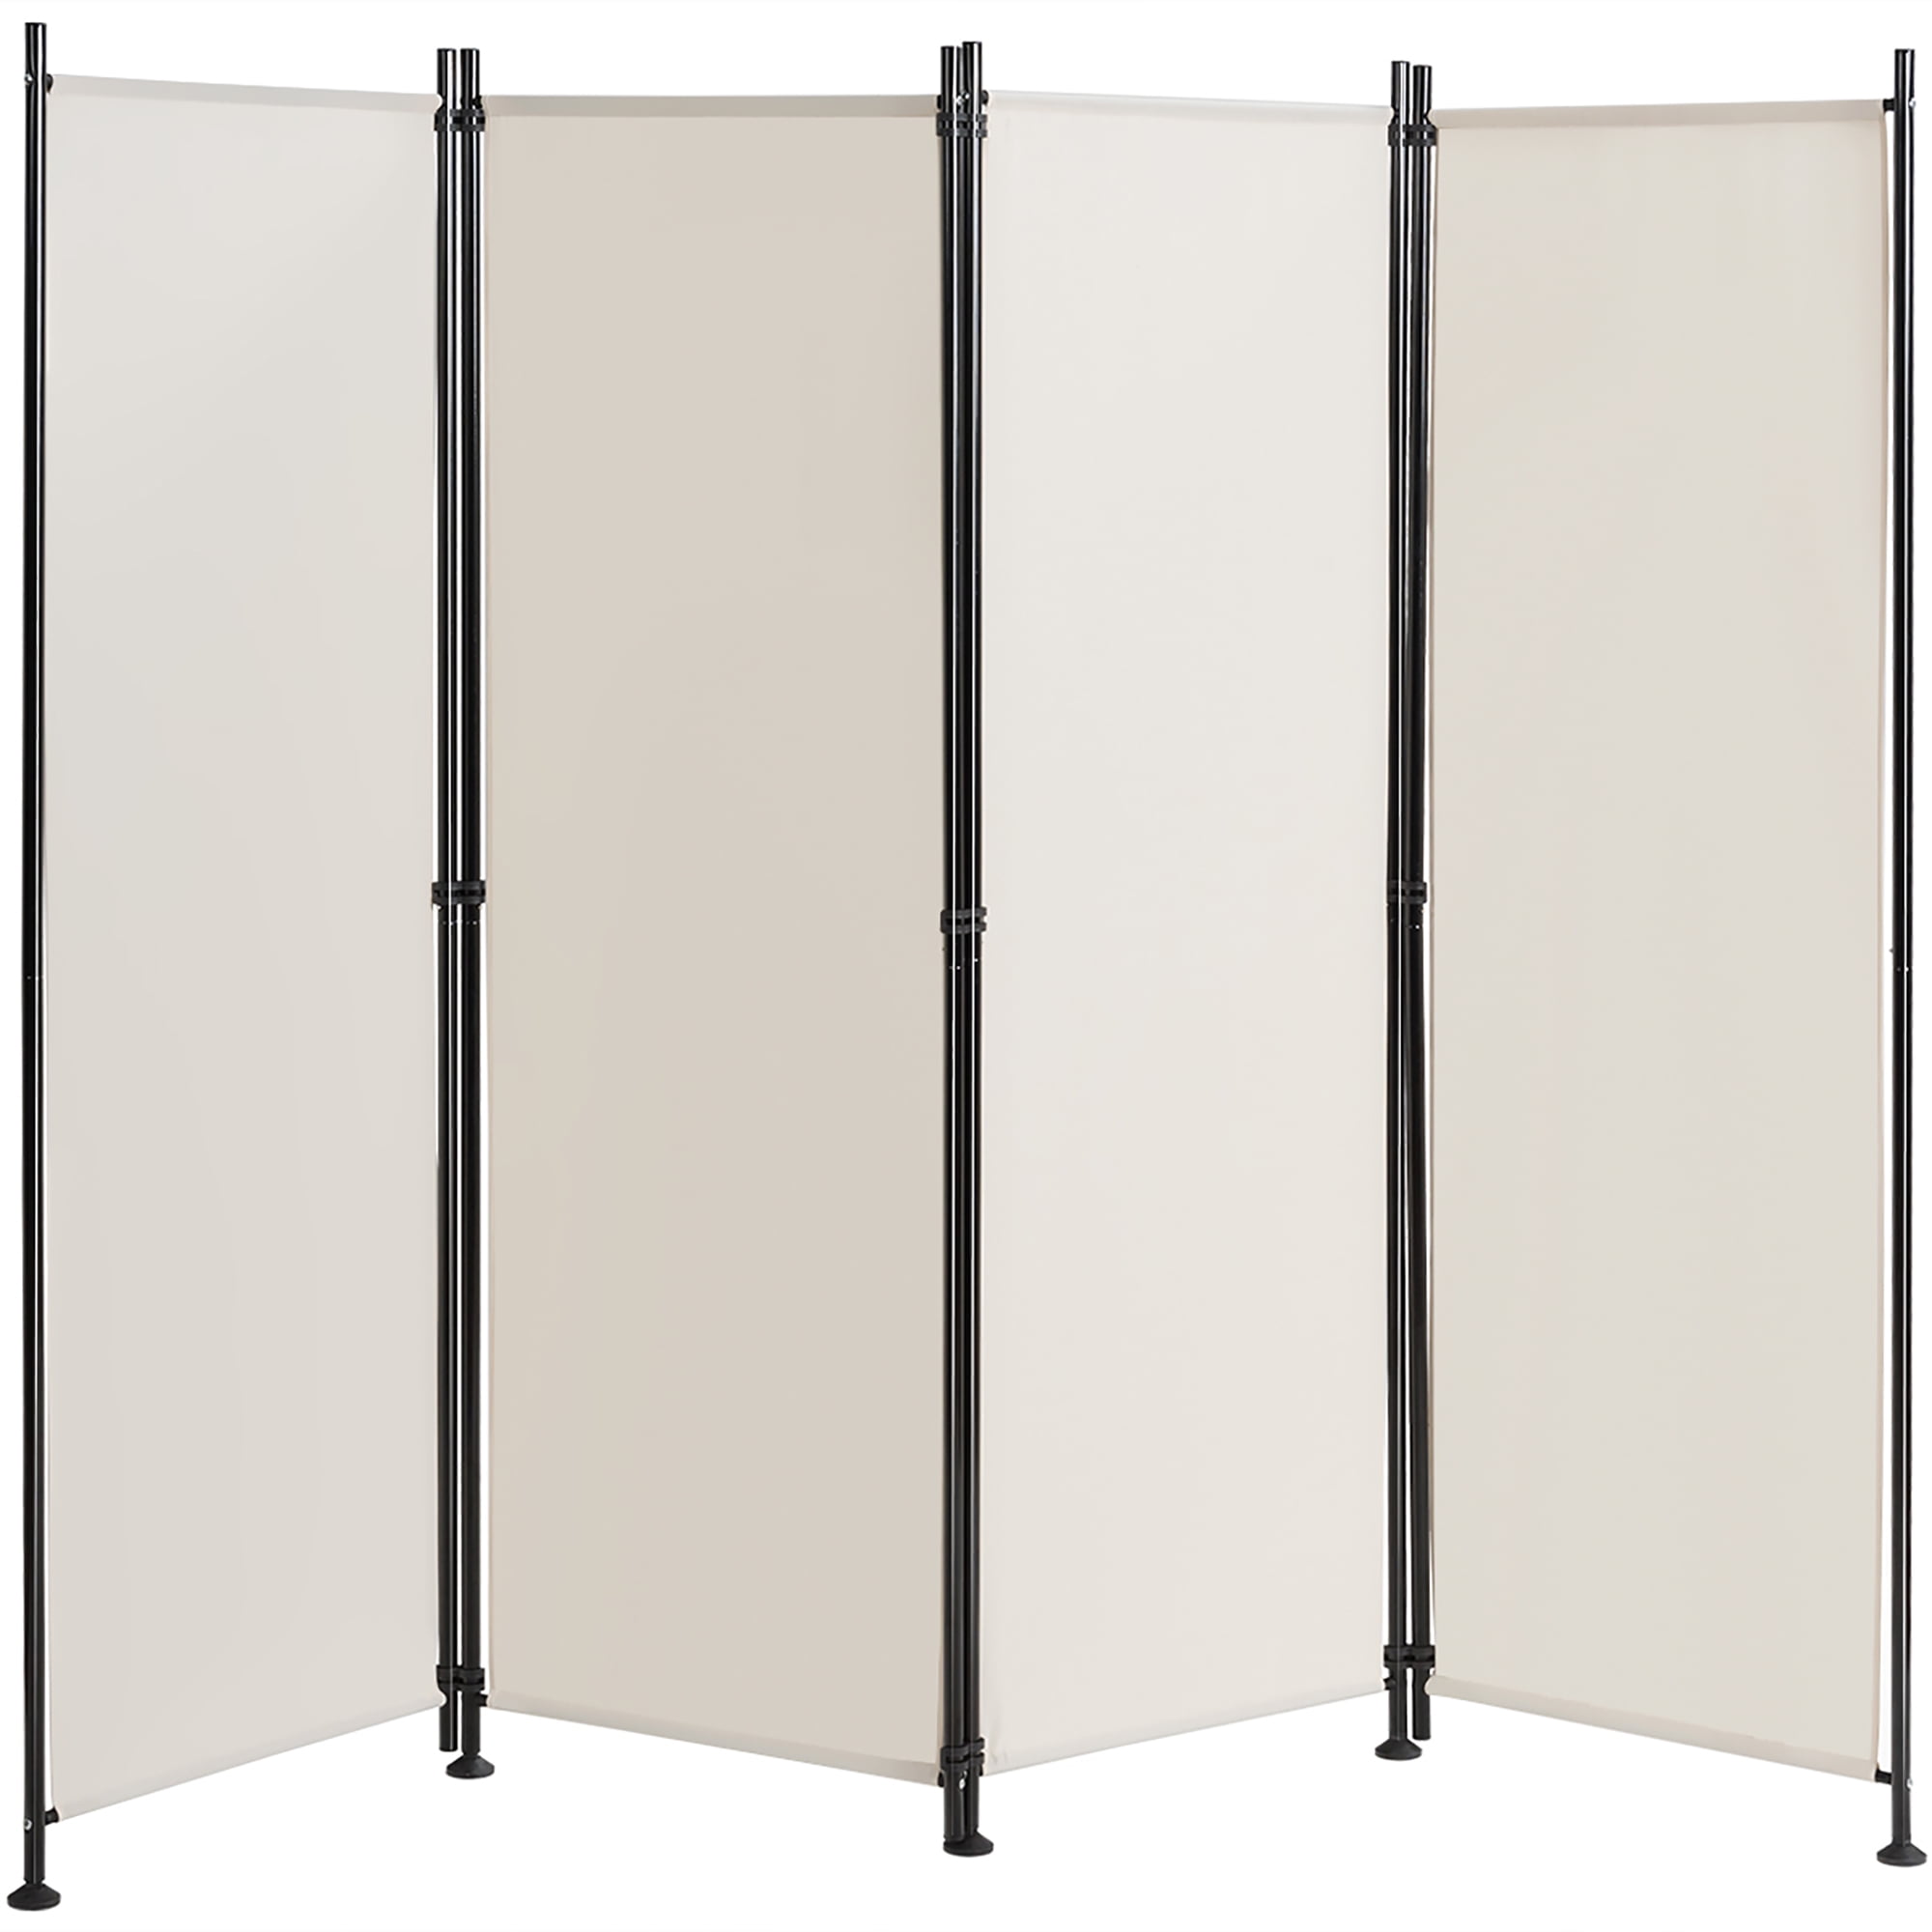 show original title Details about   Decorative Folding Screen room divider partition Spanish wall privacy b-B-0390-z-c 